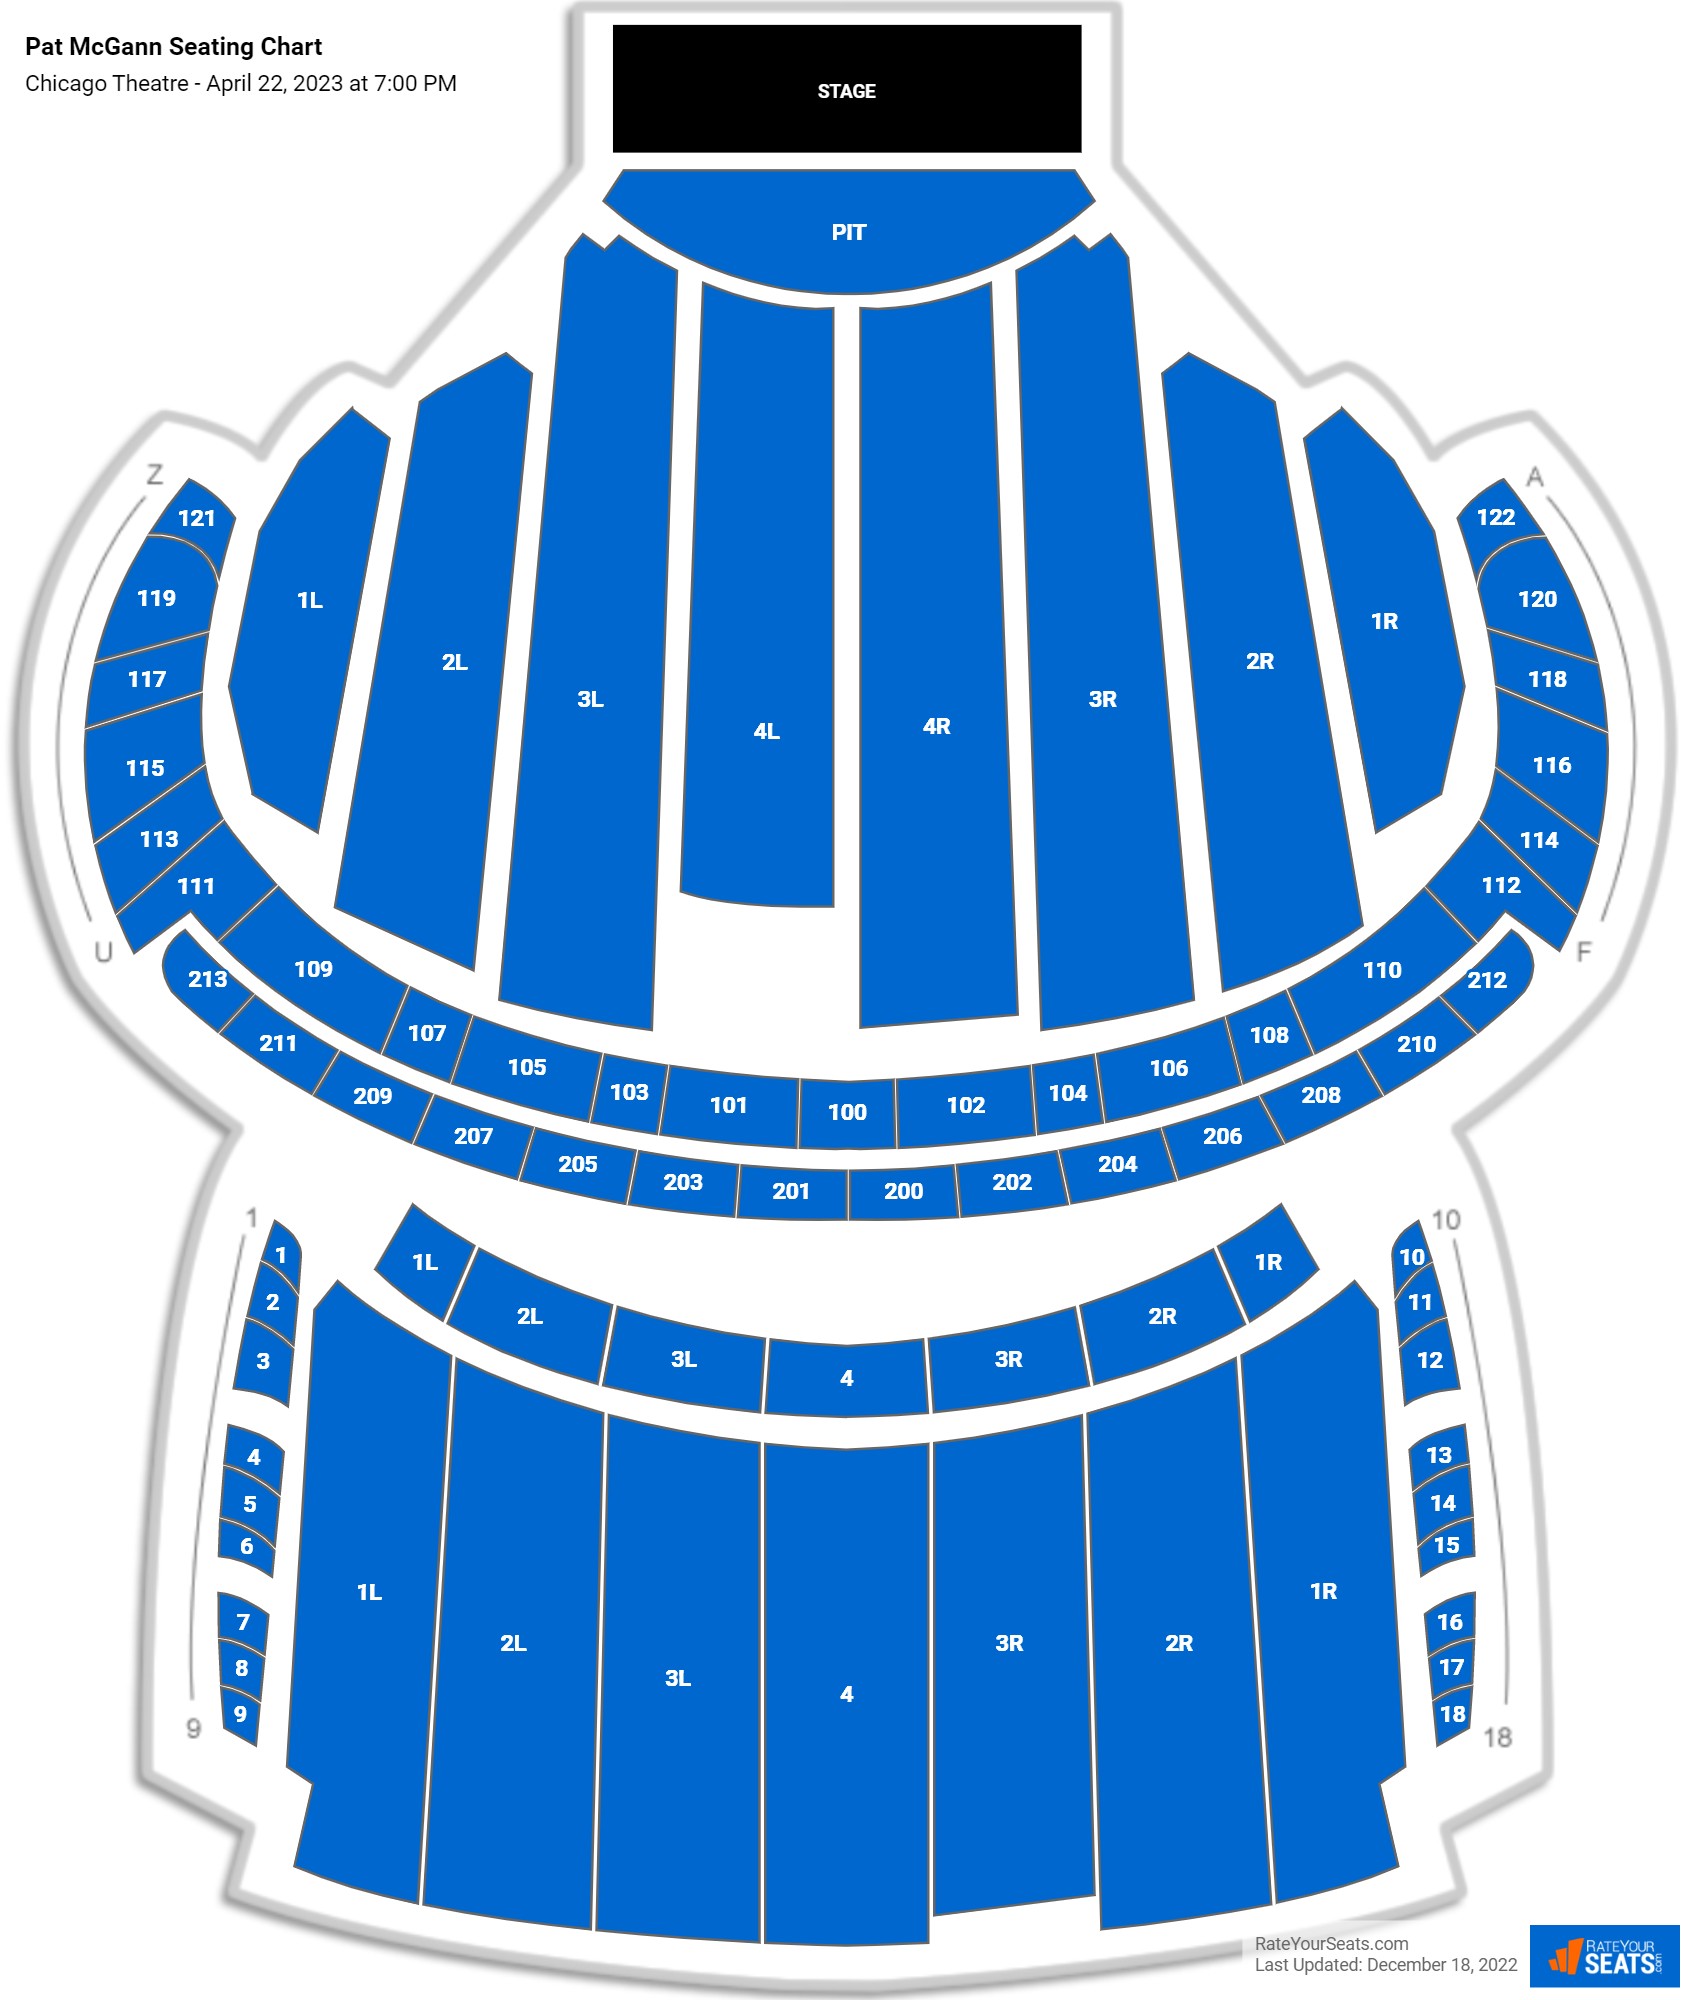 Chicago Theatre Seating Chart